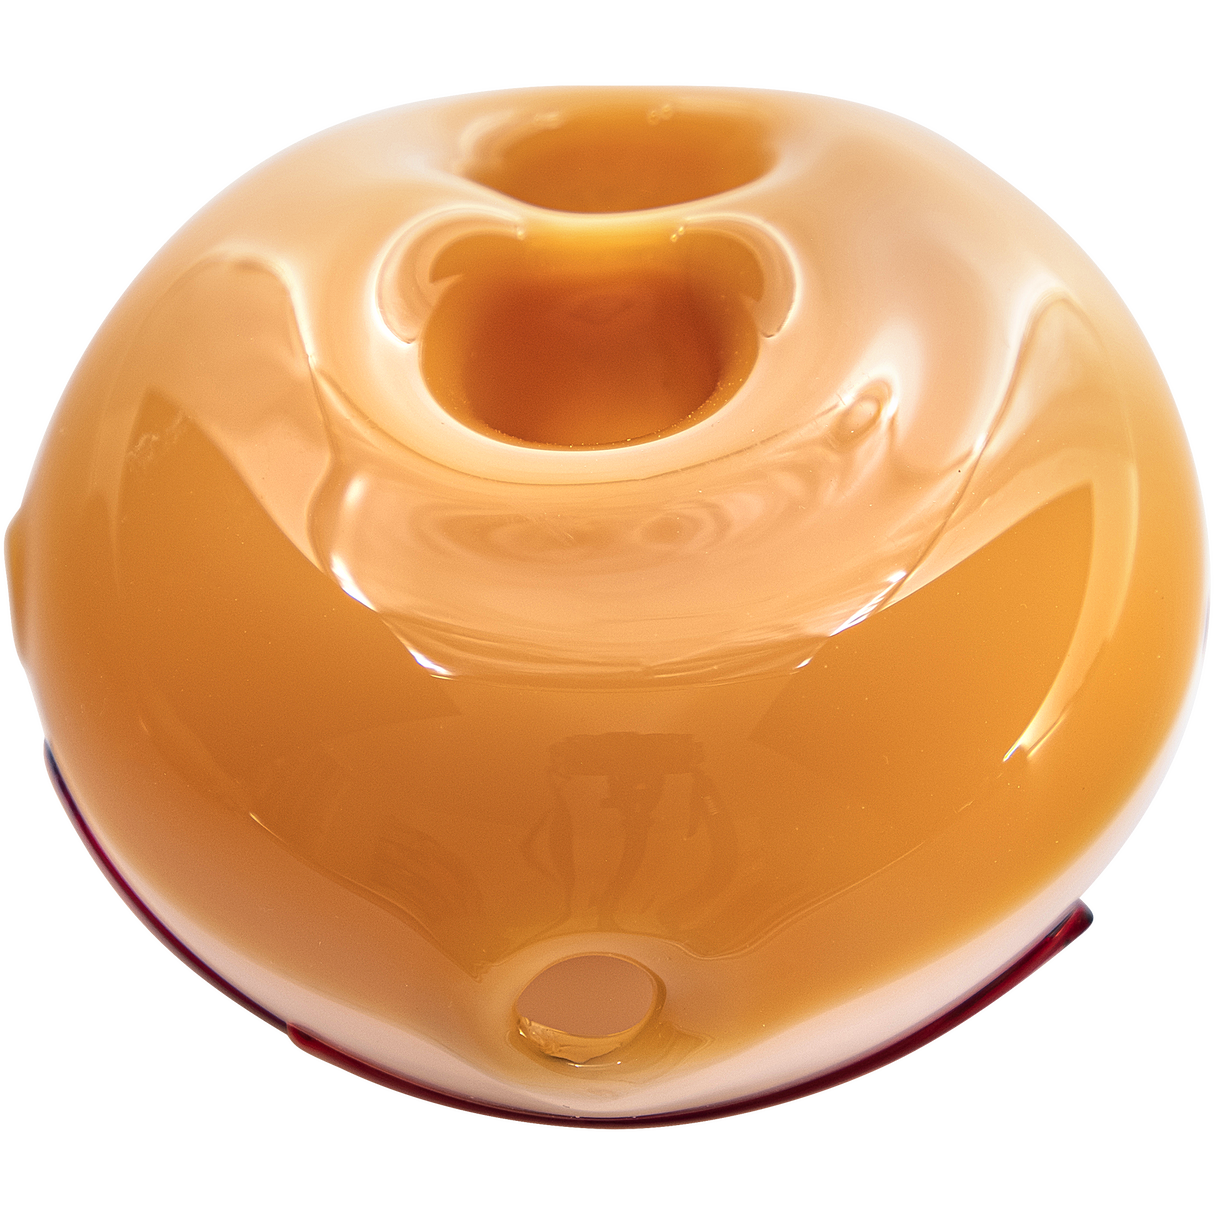 LA Pipes "Frosted Donut" Glass Pipe - Top View, Compact and Portable Design